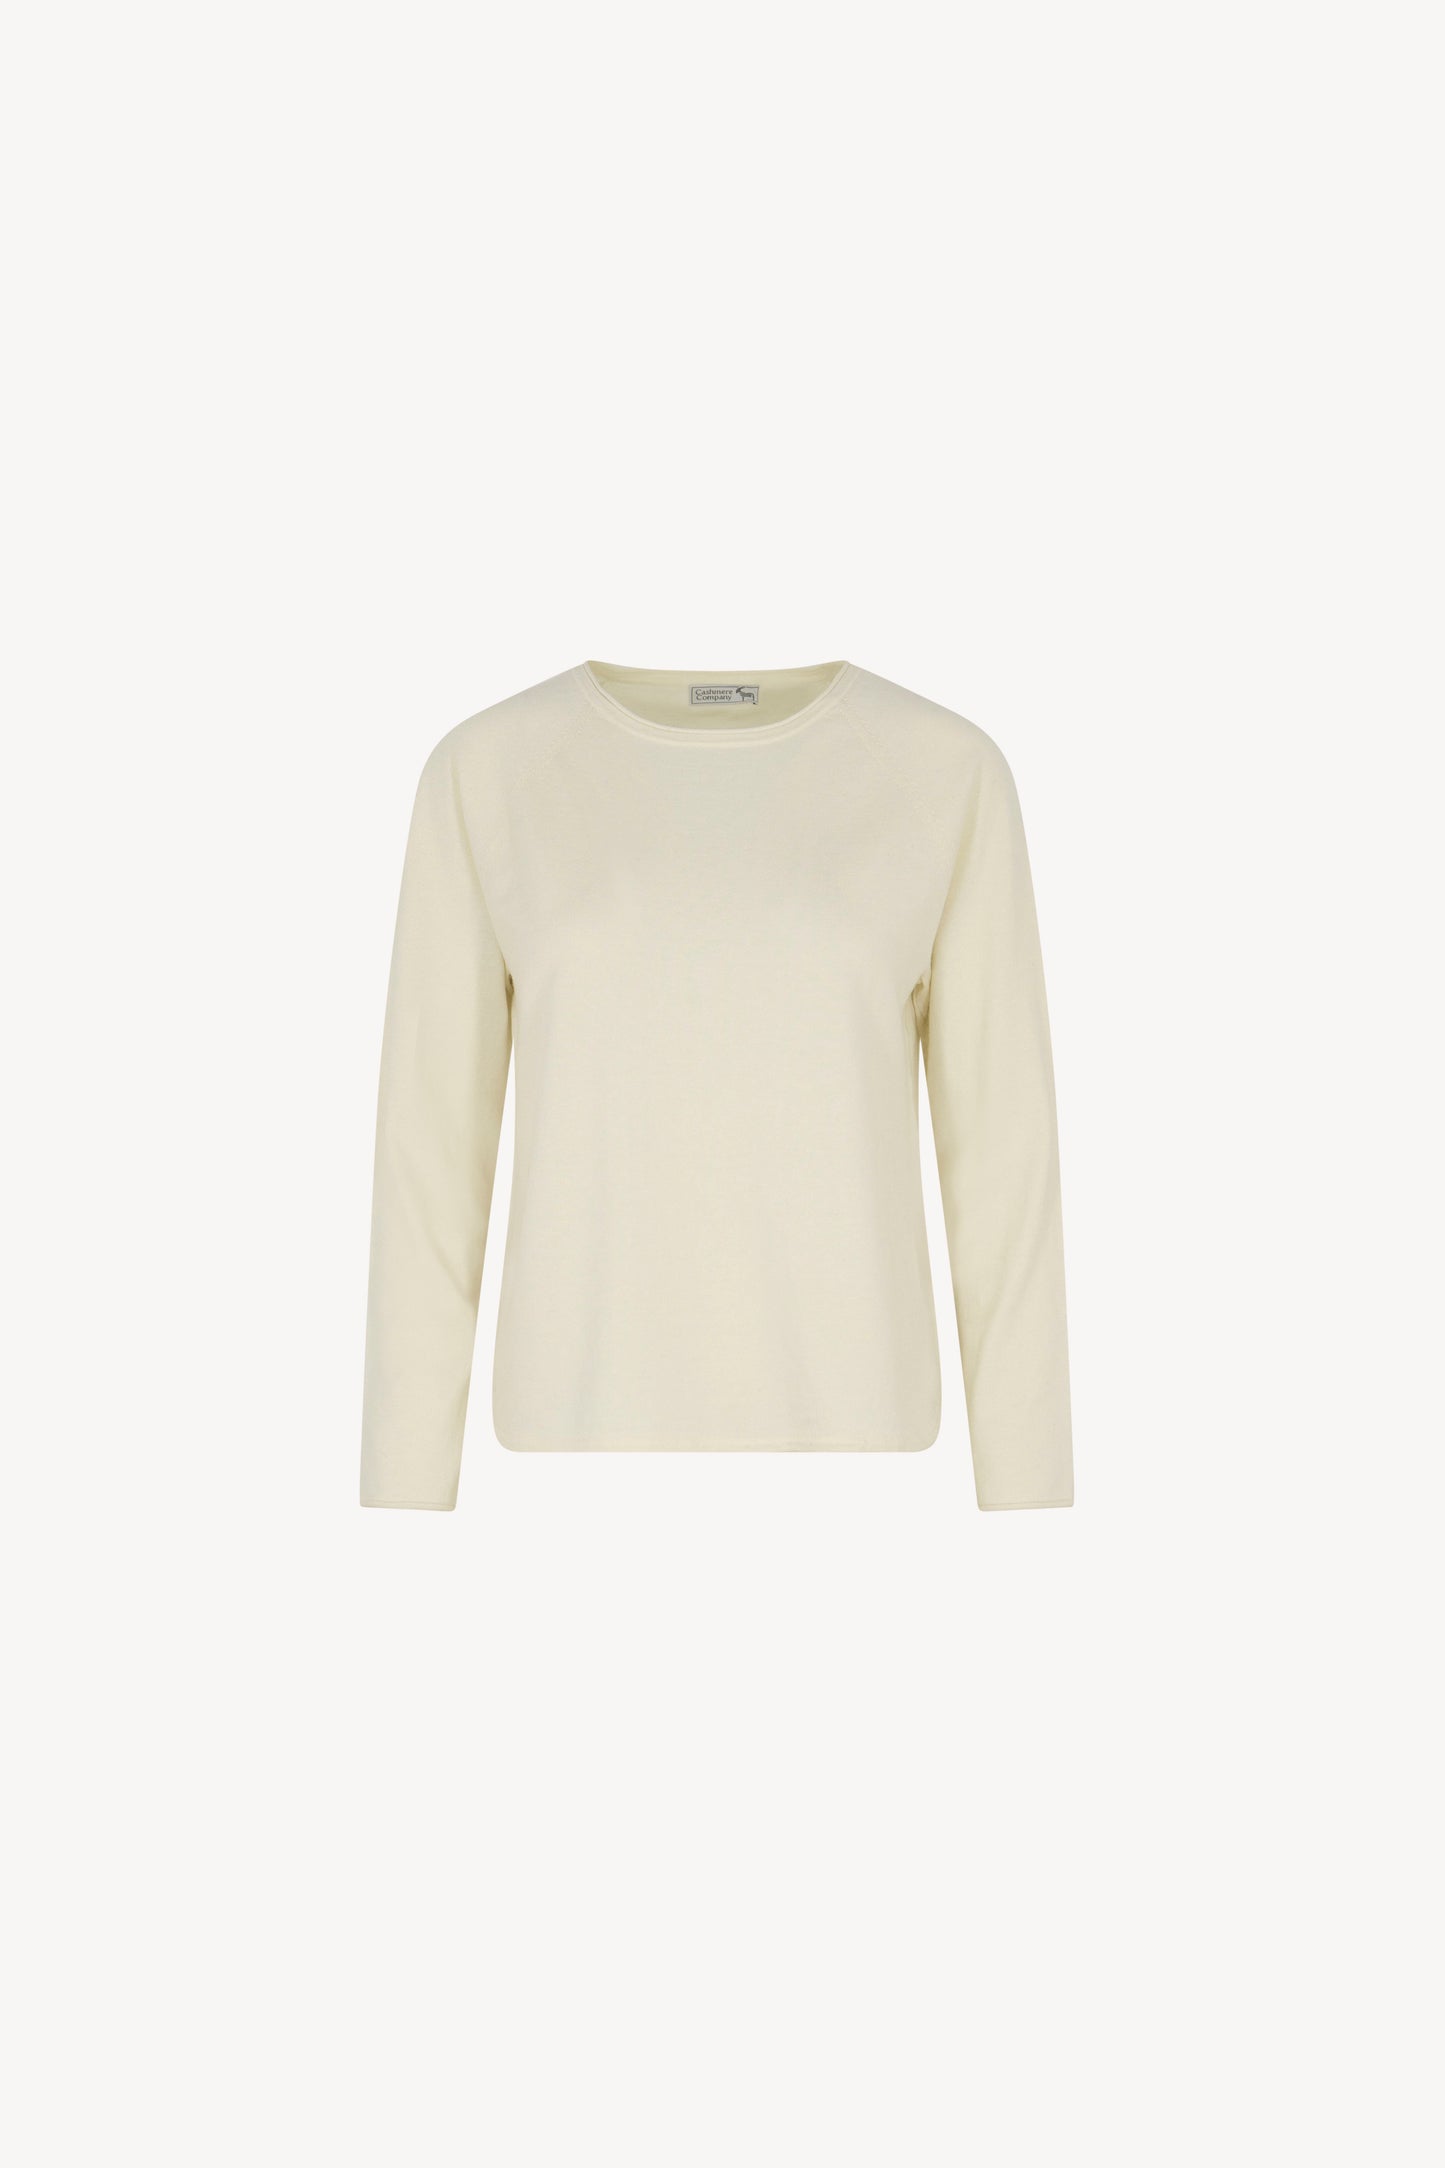 Cotton - Silk - Cashmere Rounded Sweater